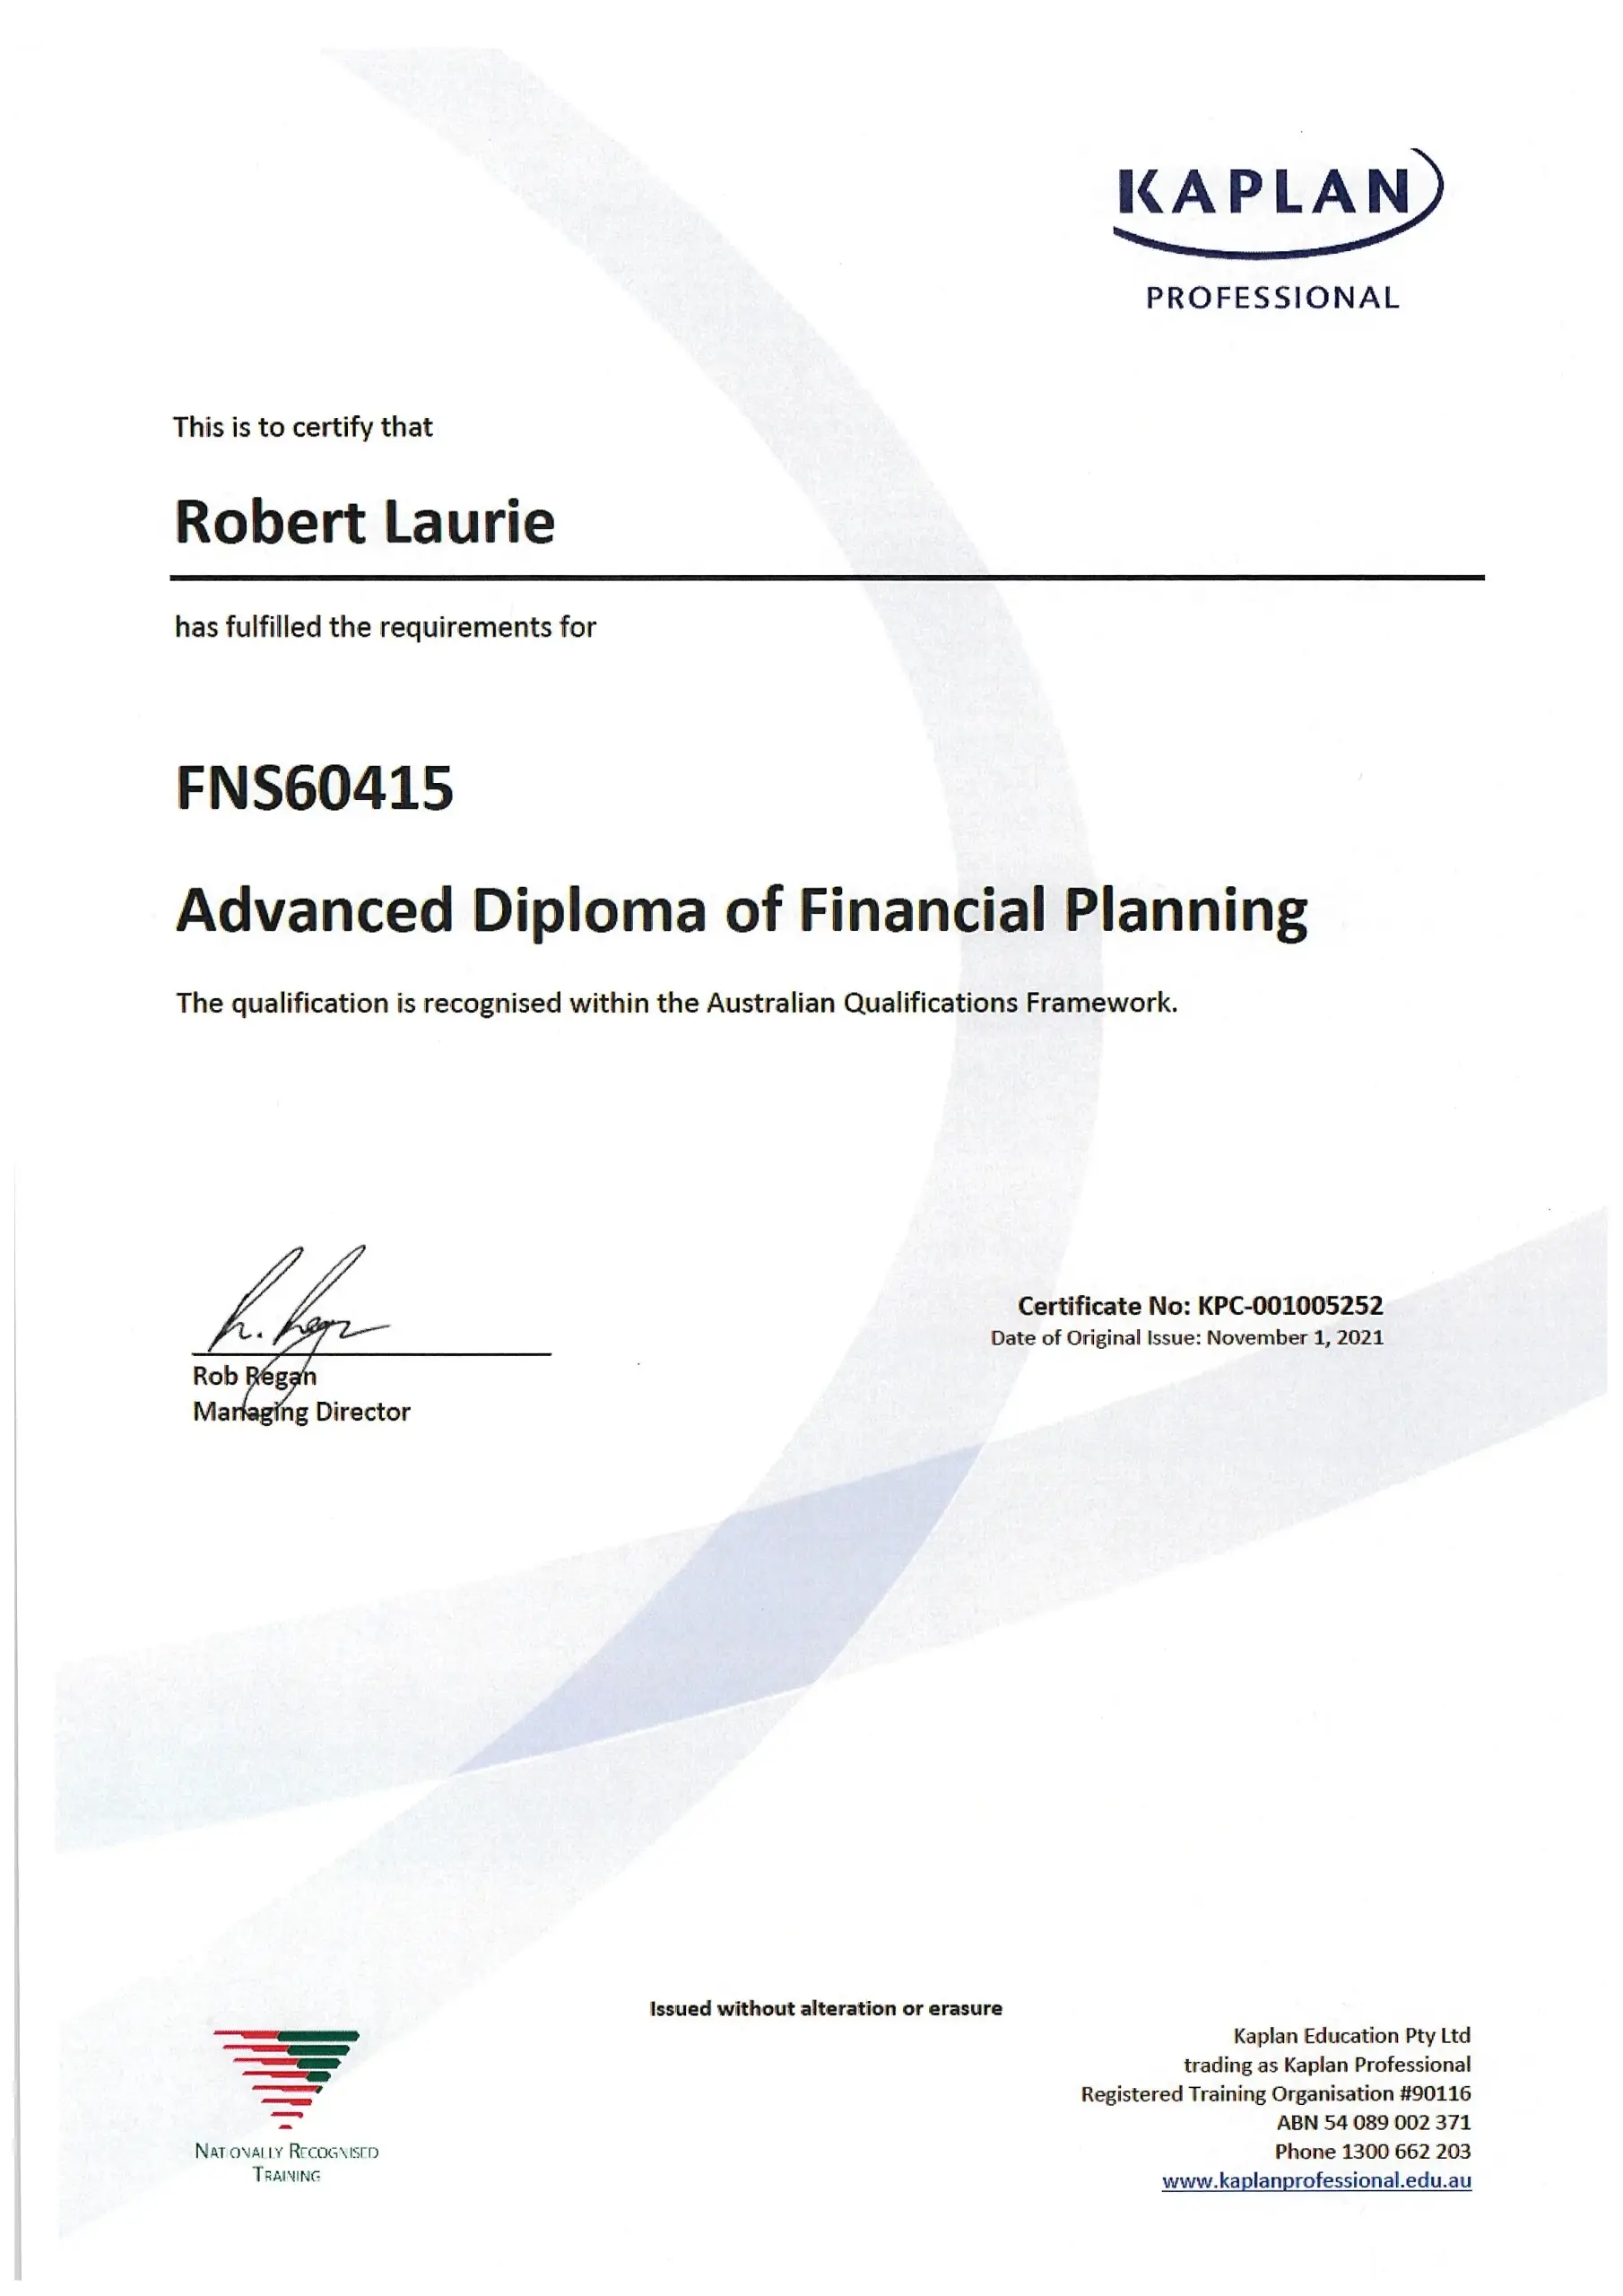 Advanced-Diploma-of-Financial-Planning-Certificate